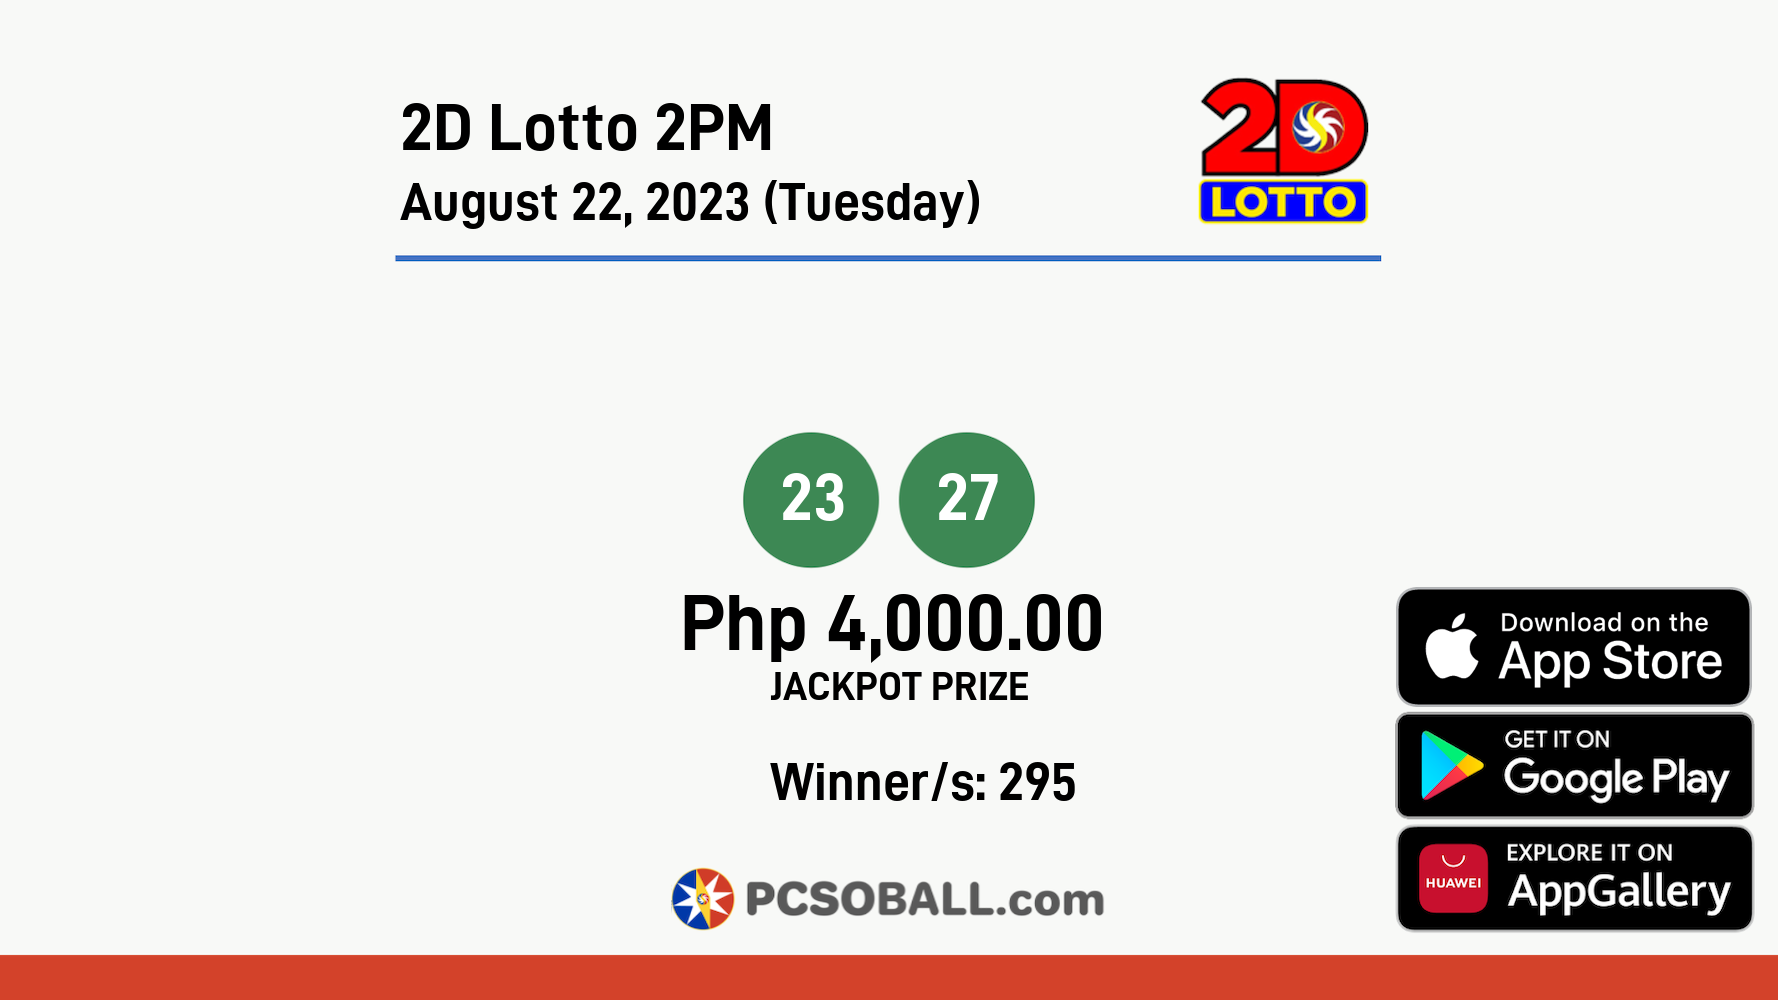 2D Lotto 2PM August 22, 2023 (Tuesday) Result